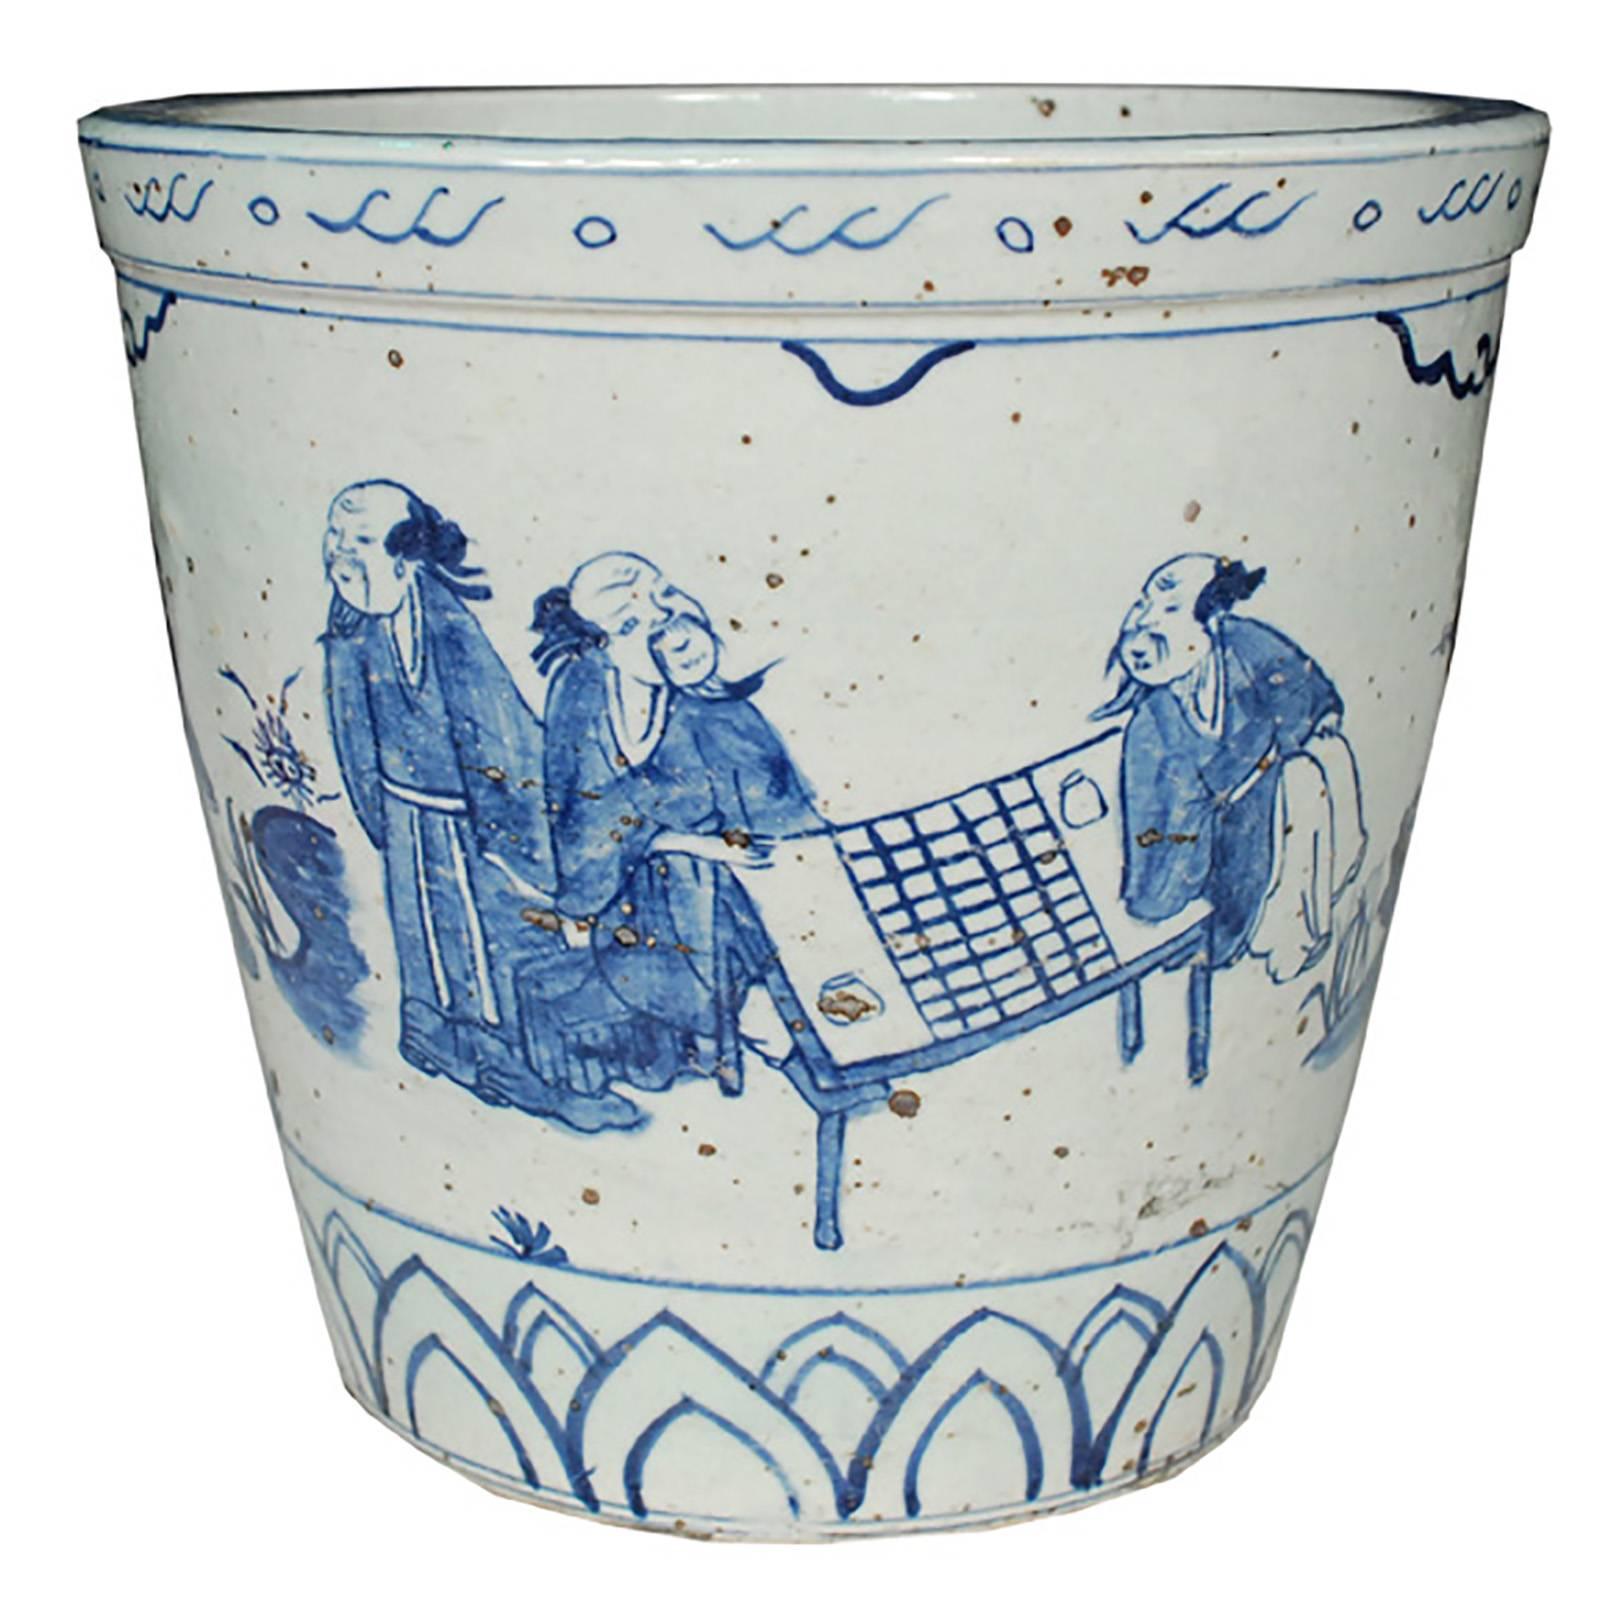 Painted Chinese Blue and White Scroll Pot with Yagi Scene